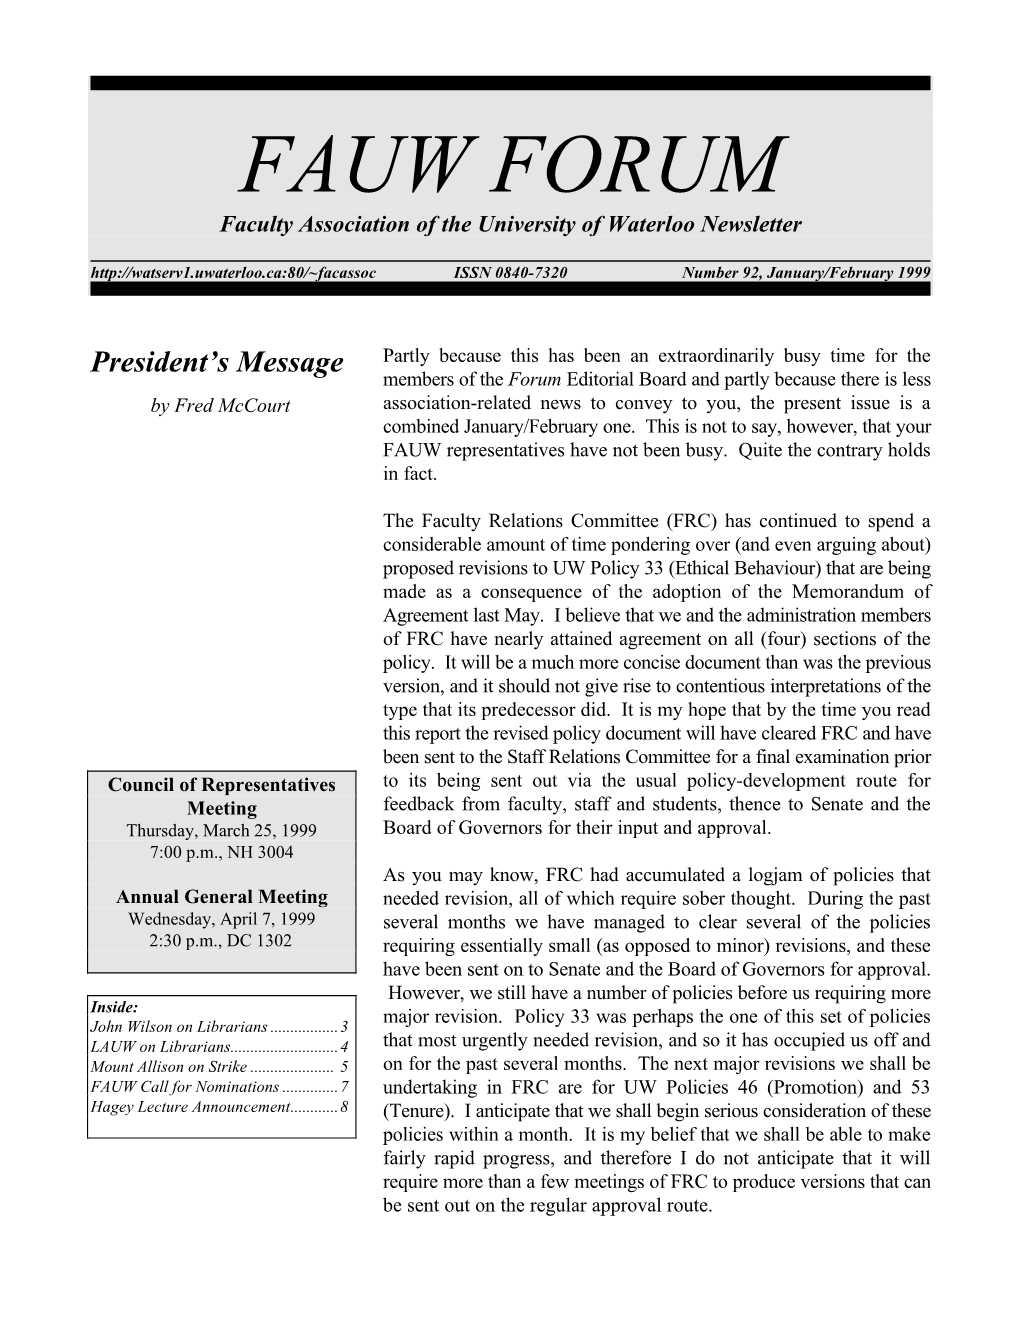 FAUW FORUM Faculty Association of the University of Waterloo Newsletter ISSN 0840-7320 Number 92, January/February 1999